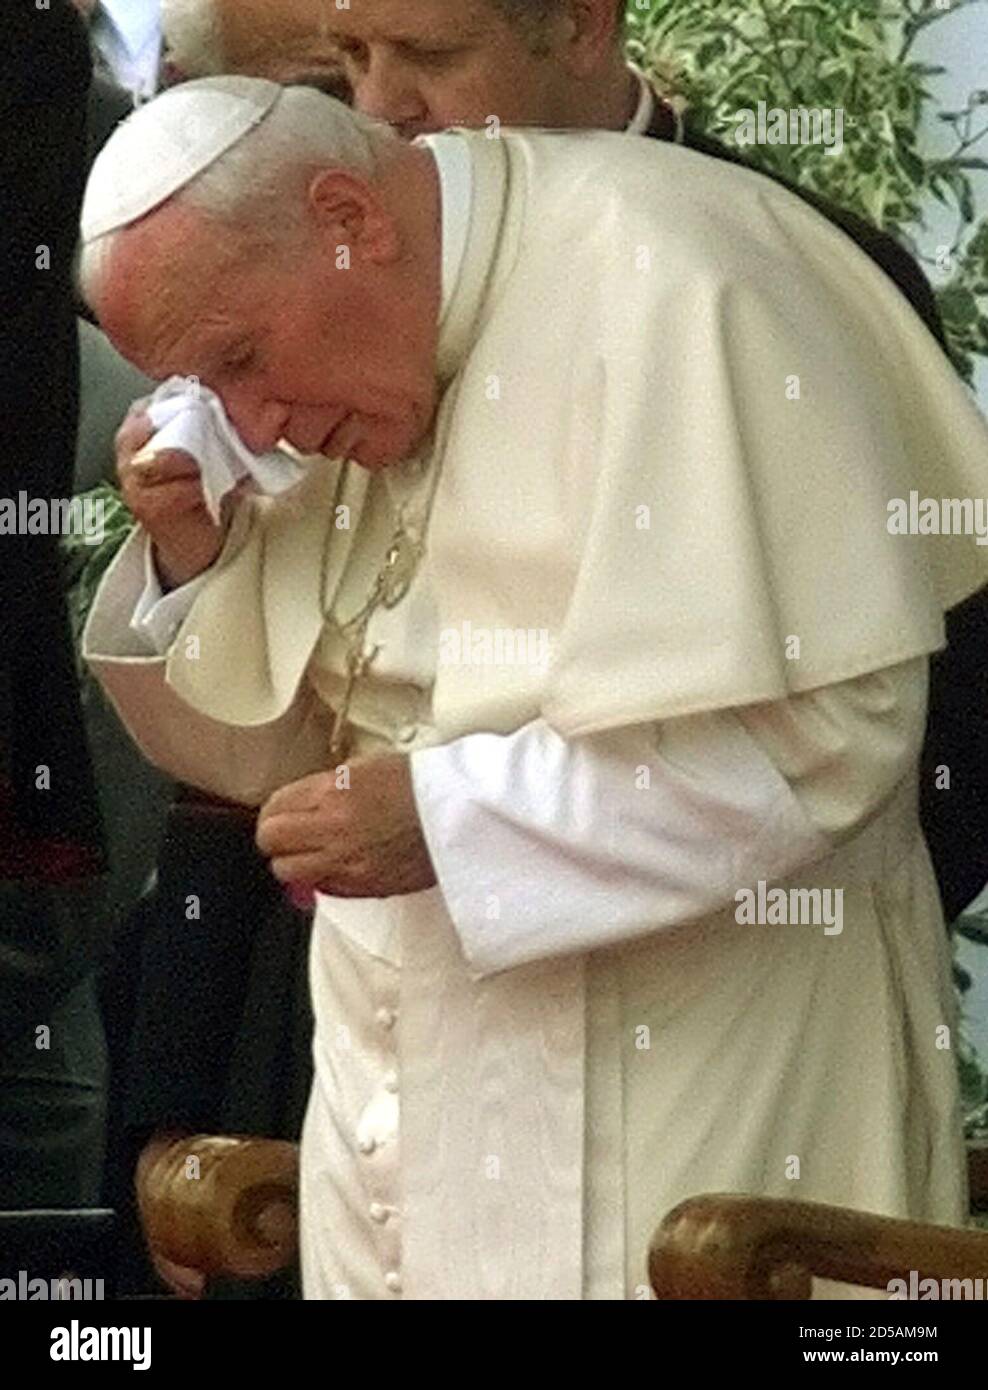 Pope John Paul II wipes his face during a fair well ceremony at the Balice airport June 17. The 79-year-old Pontiff finished his 13-days visit to his home country Poland.   ??» Stock Photo